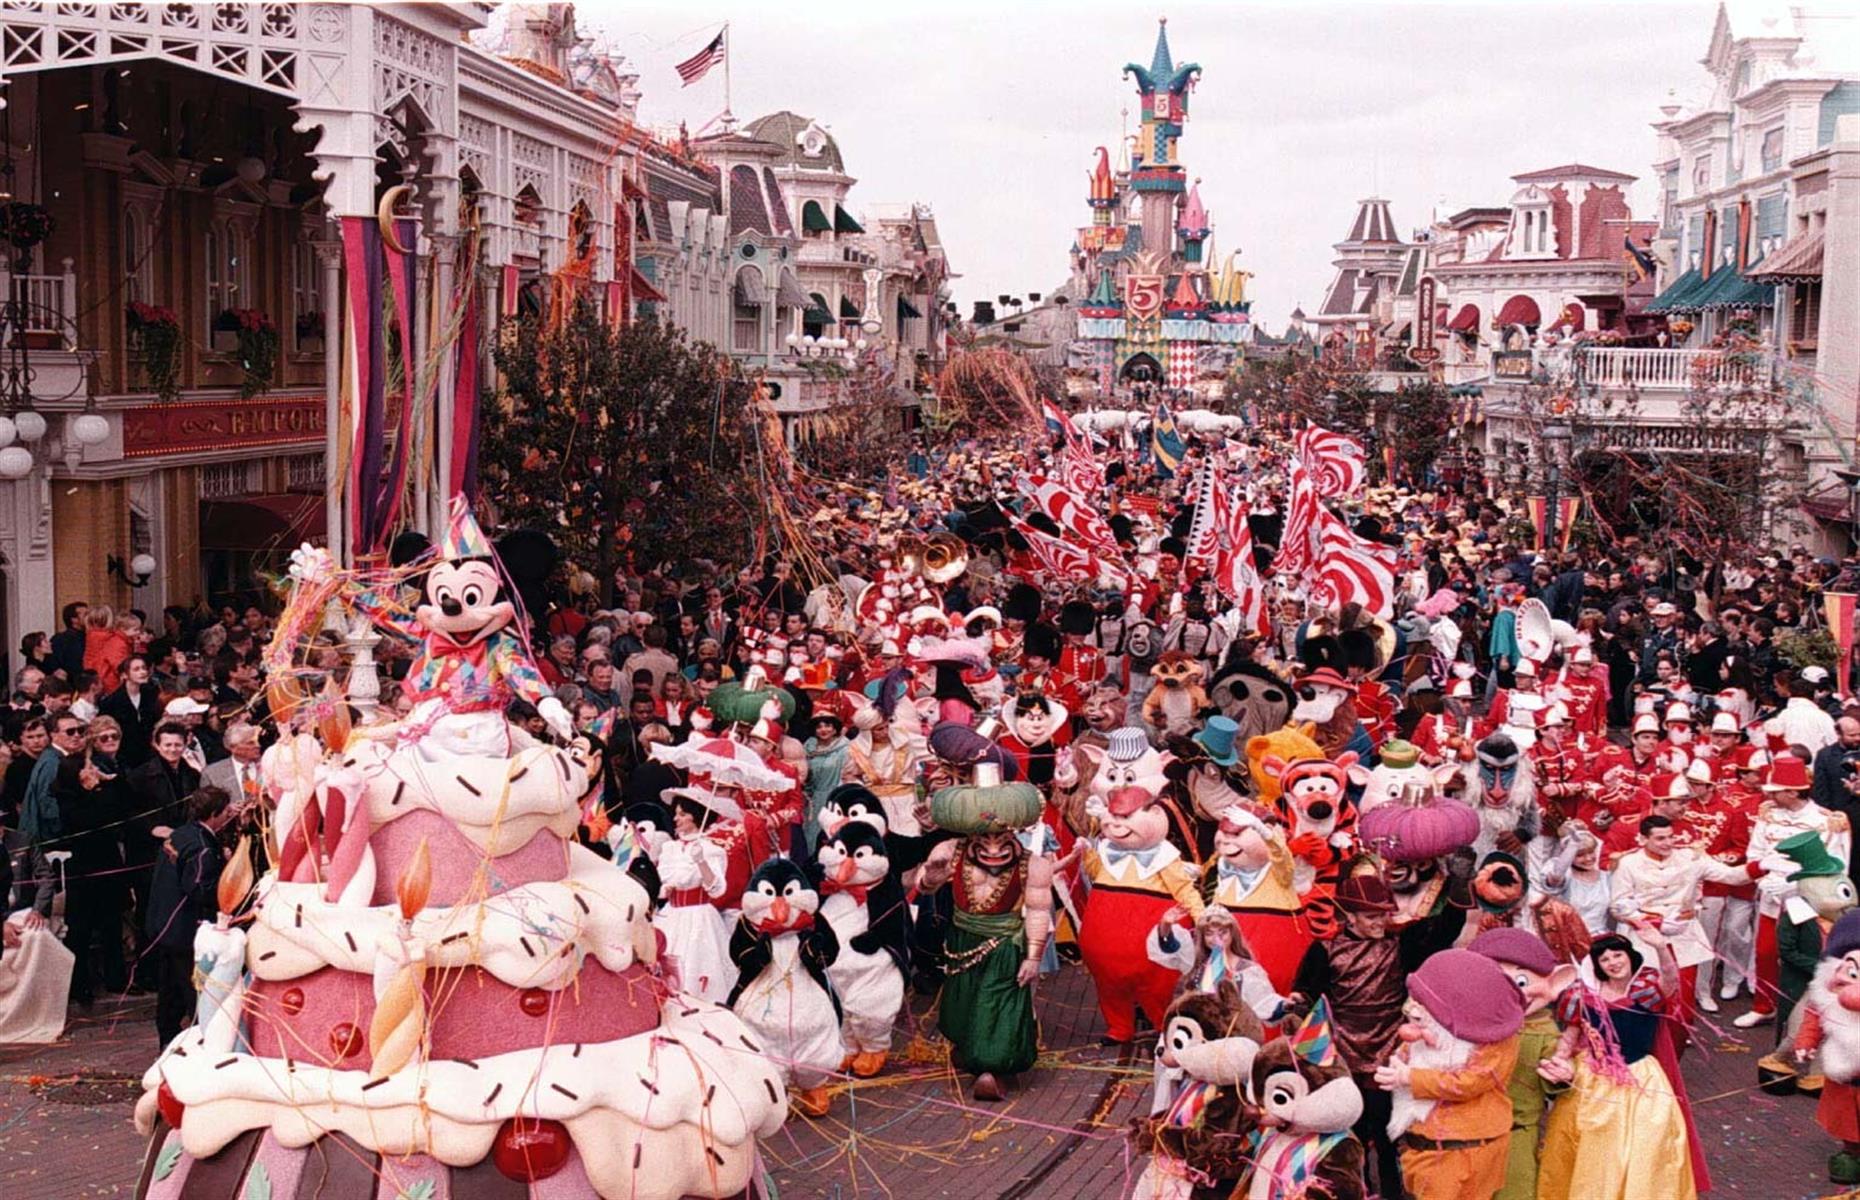 Slide 36 of 38: On 12 April 1997, Disneyland Paris (newly christened in 1994) celebrated its 5th birthday. The milestone was marked with a grand parade featuring hundreds of beloved Disney characters, from Snow White to Donald Duck. The parade saw star-of-the-show Mickey Mouse burst out from a giant birthday cake to the delight of the onlooking crowd.